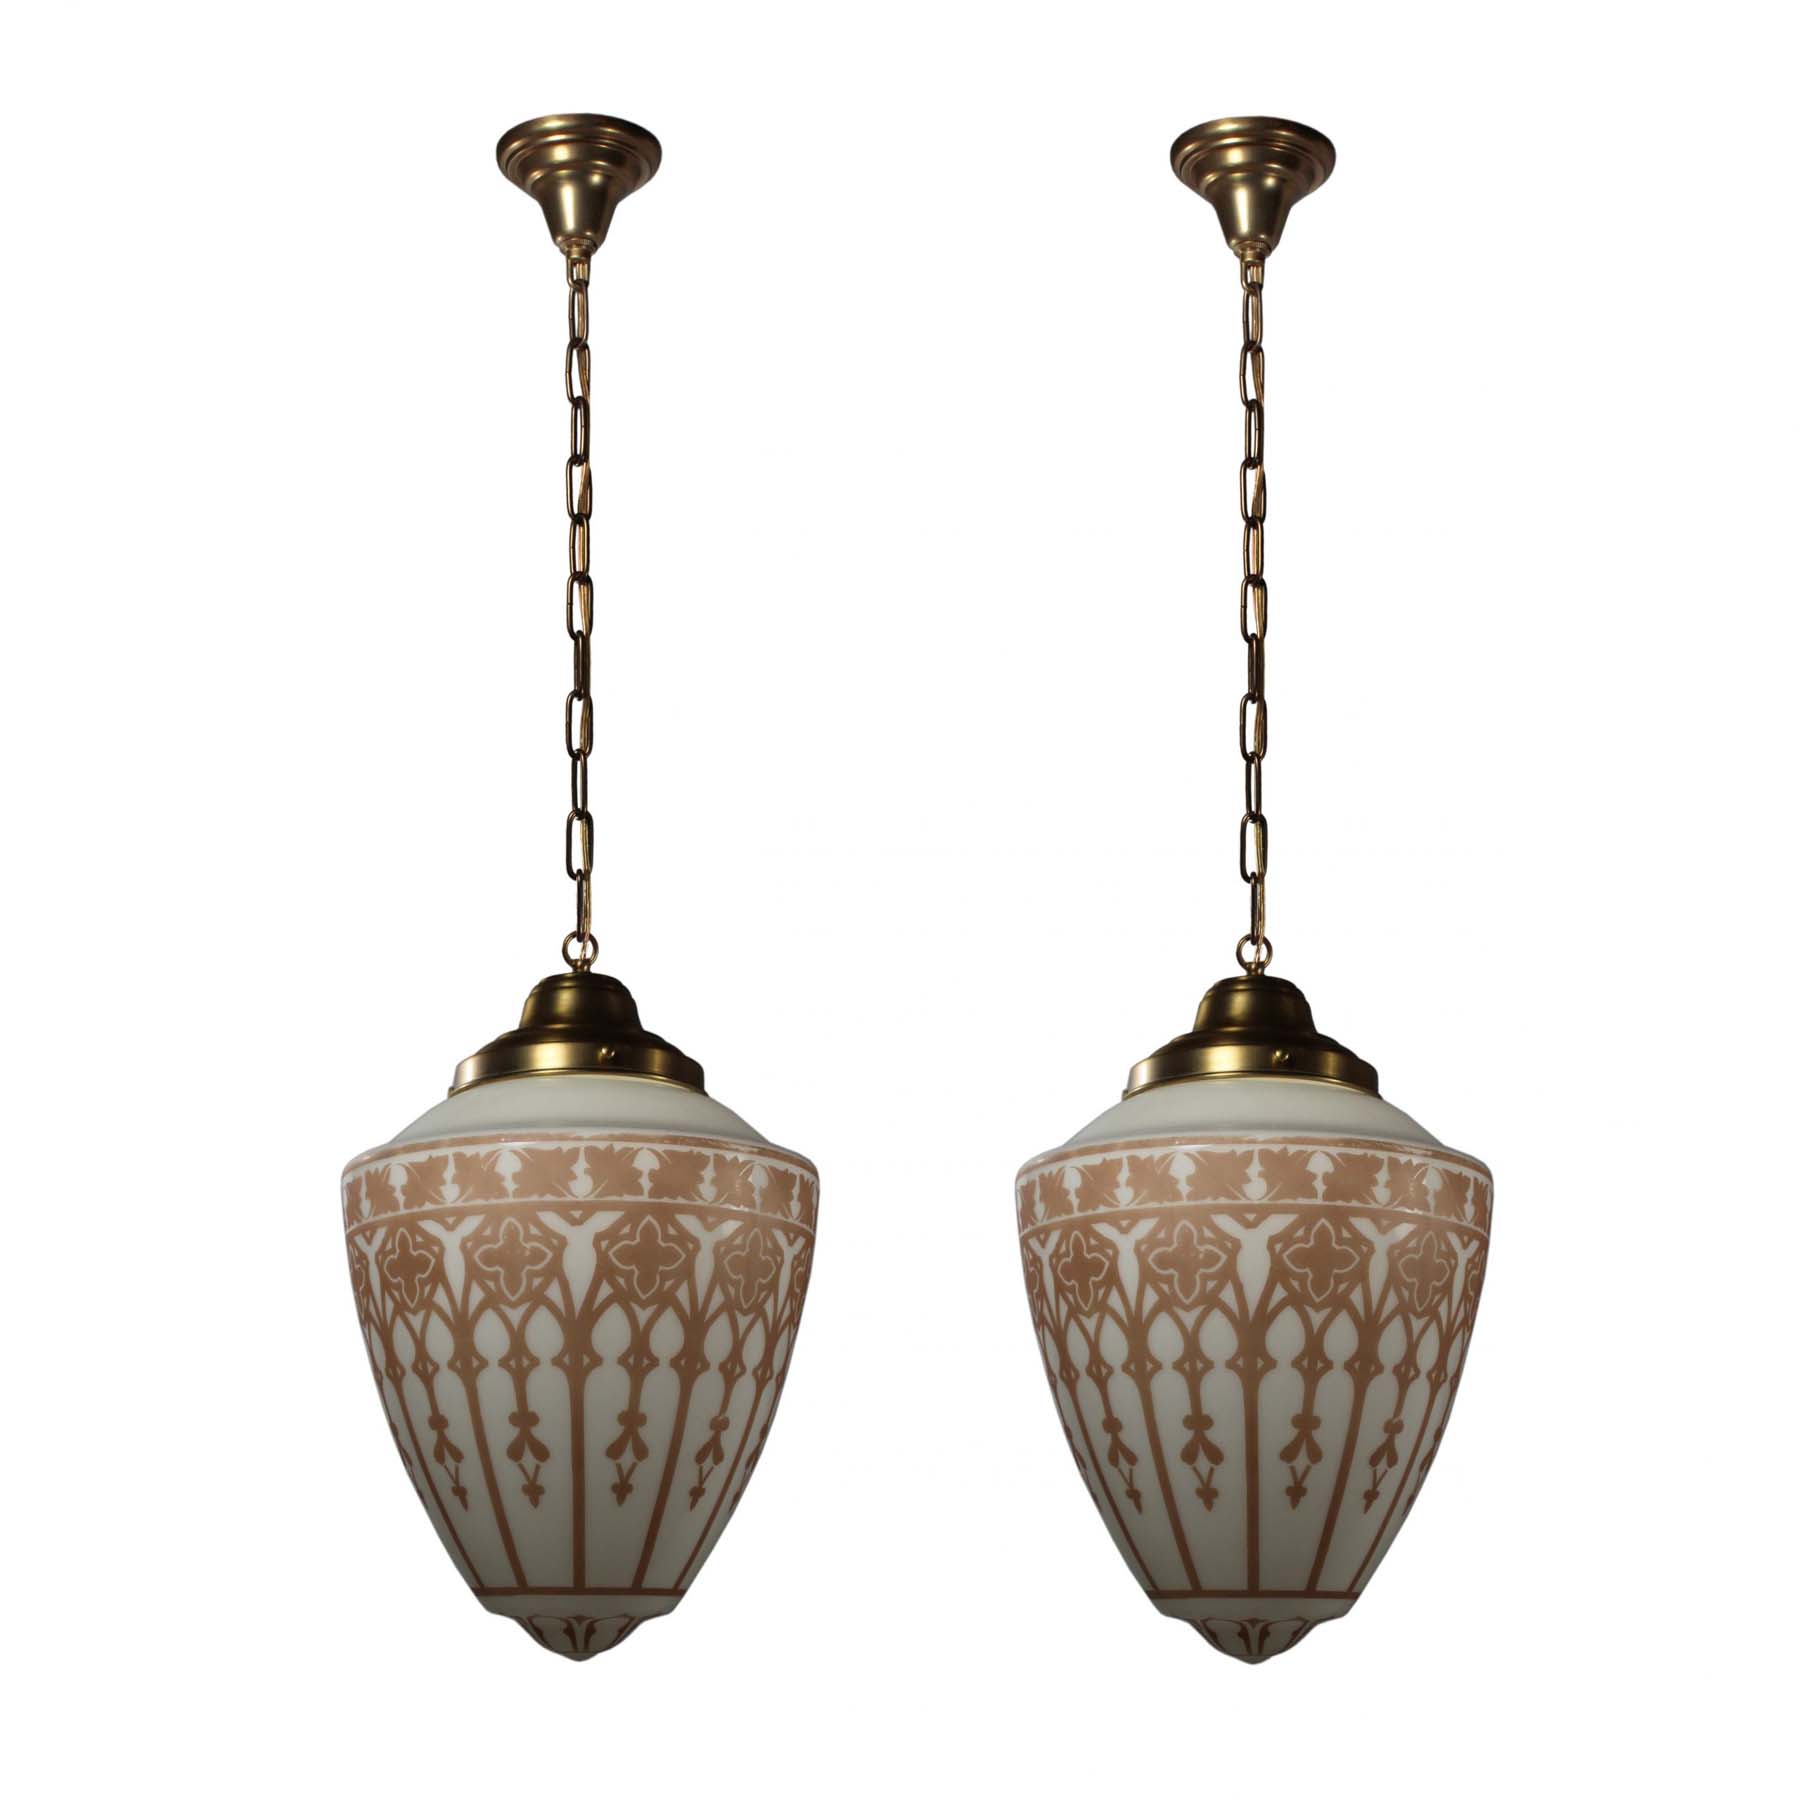 Matching Antique Pendant Lights with Original Glass Shades-0